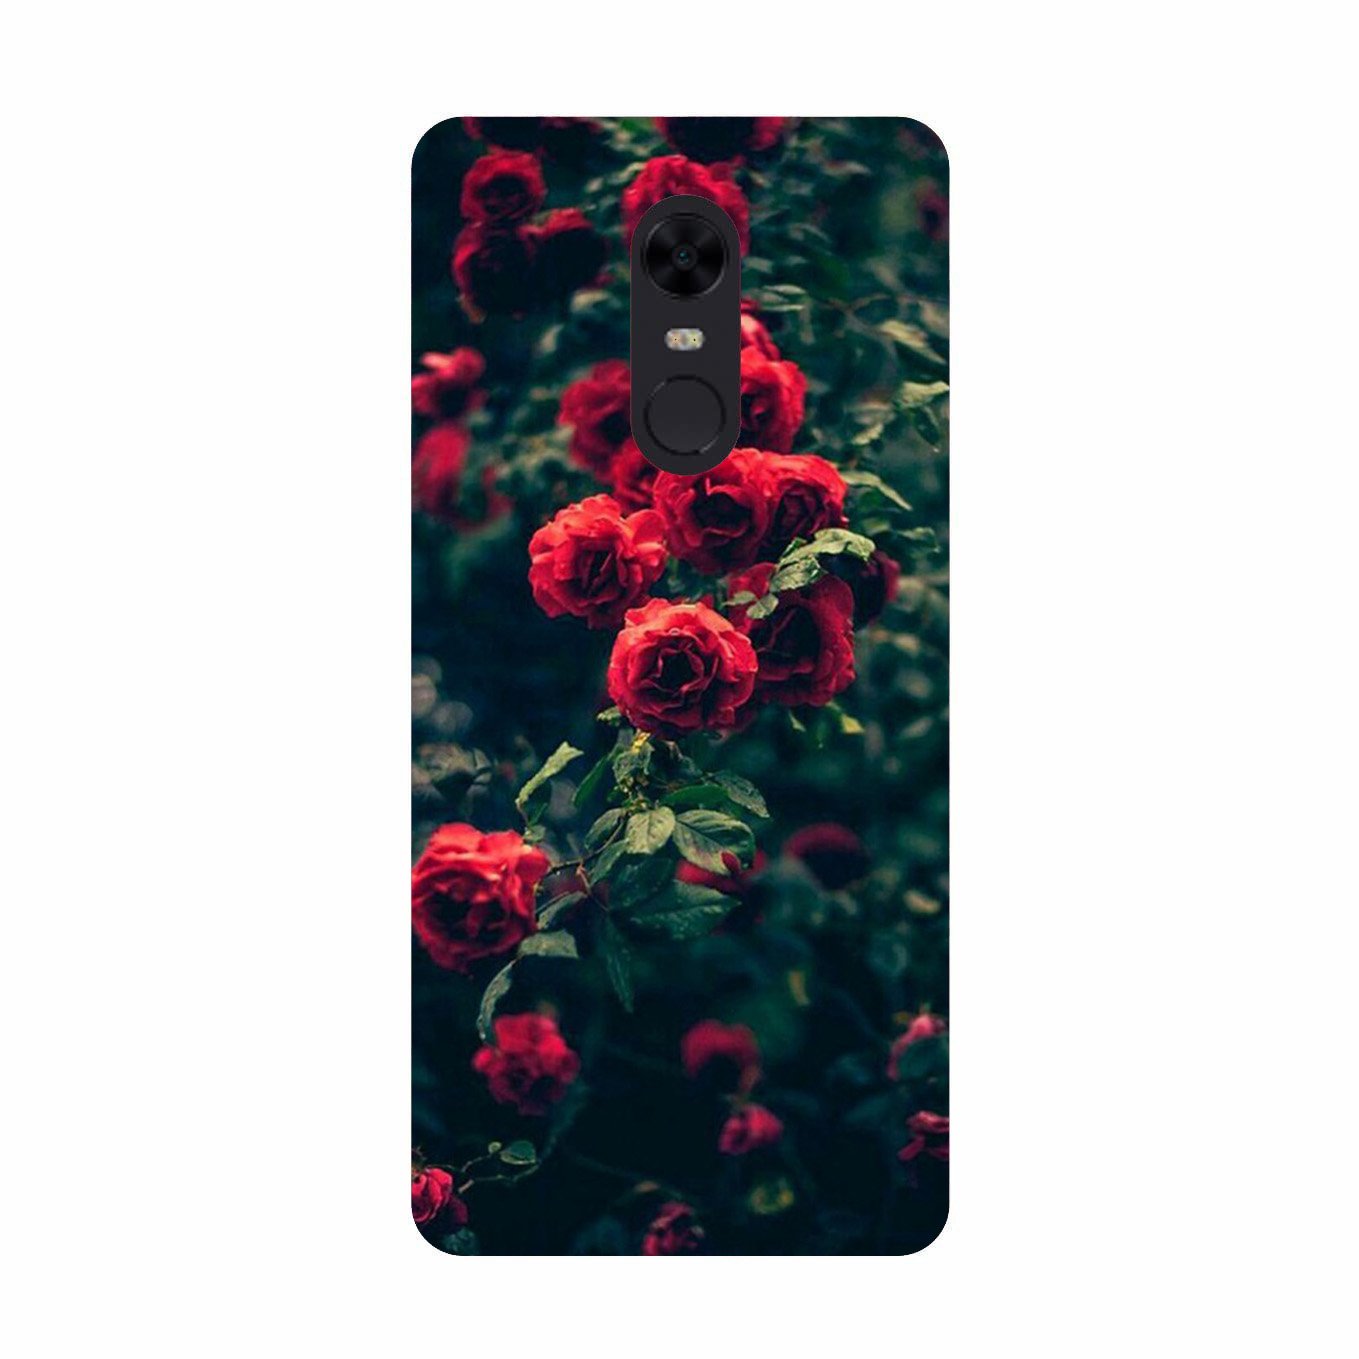 Red Rose Case for Redmi Note 5